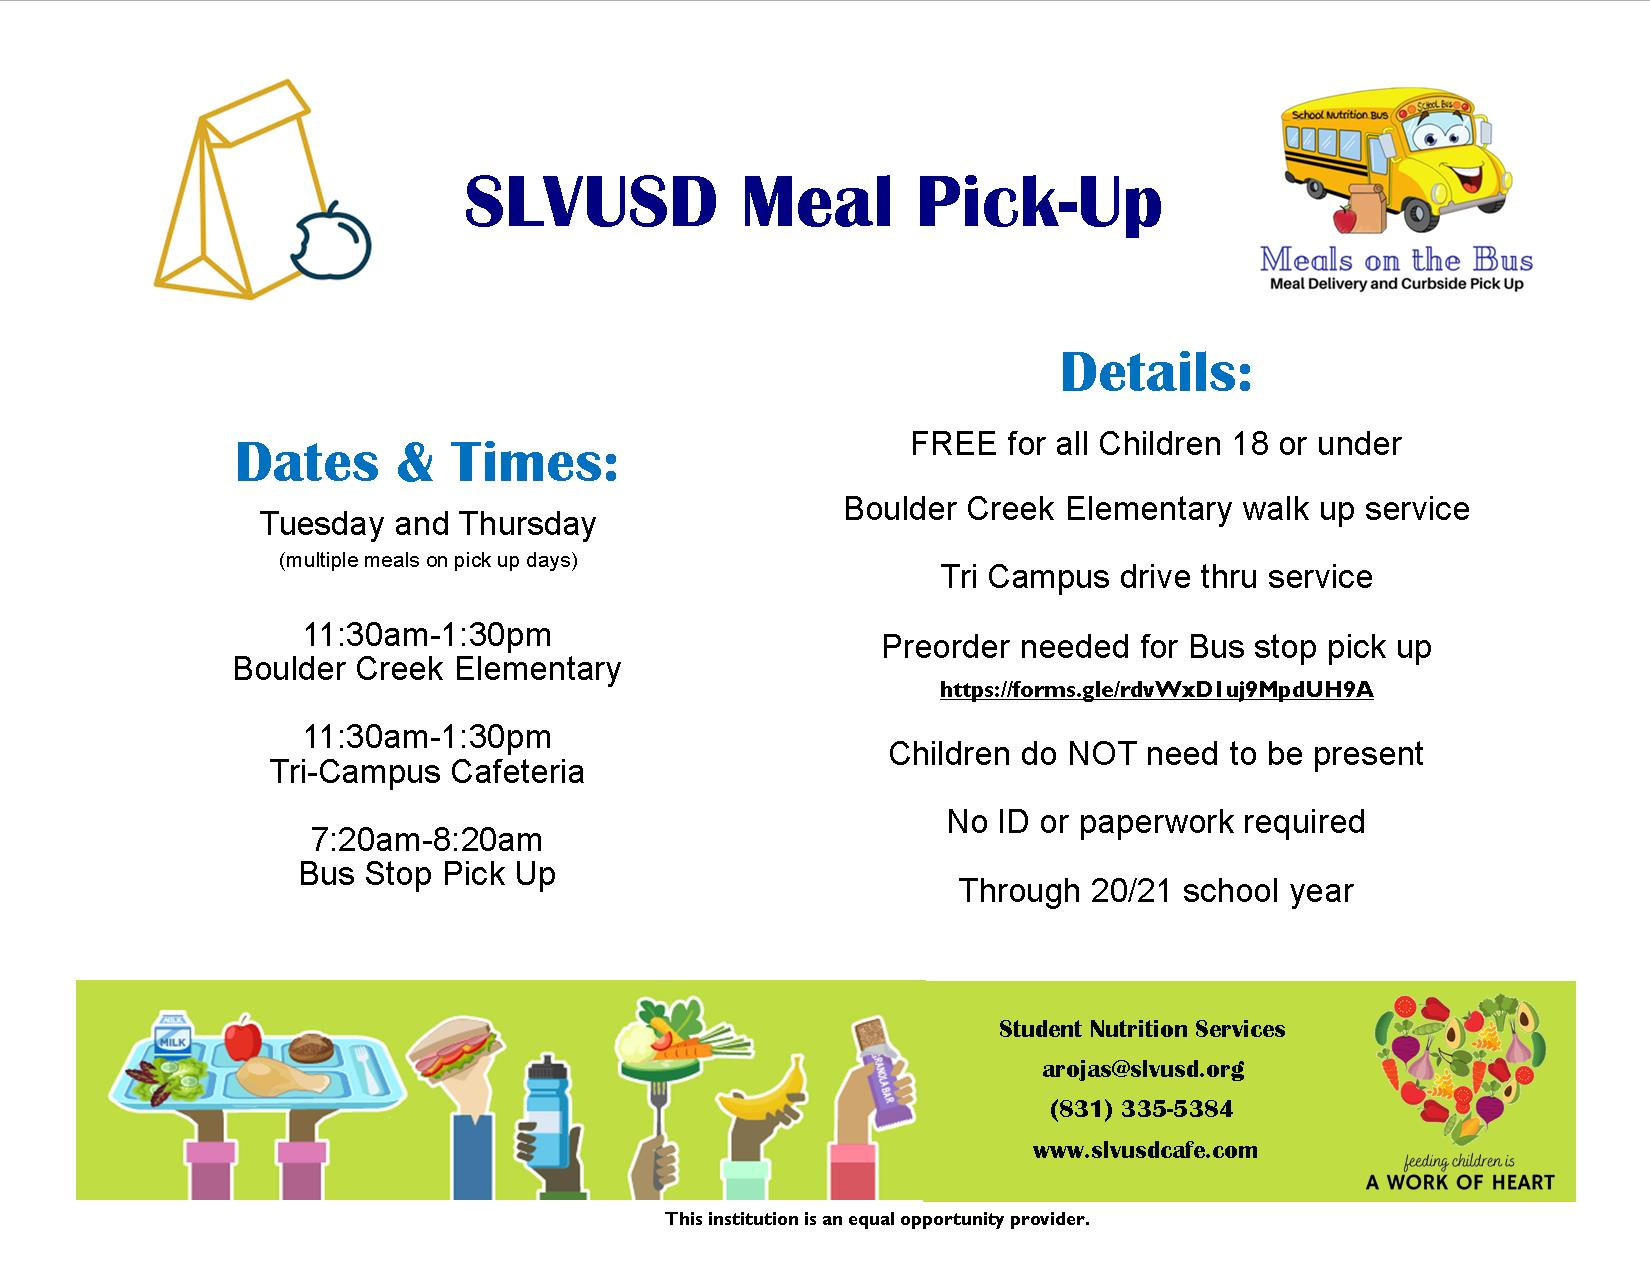 slvusd meal pick-up; call 335-5384 for details